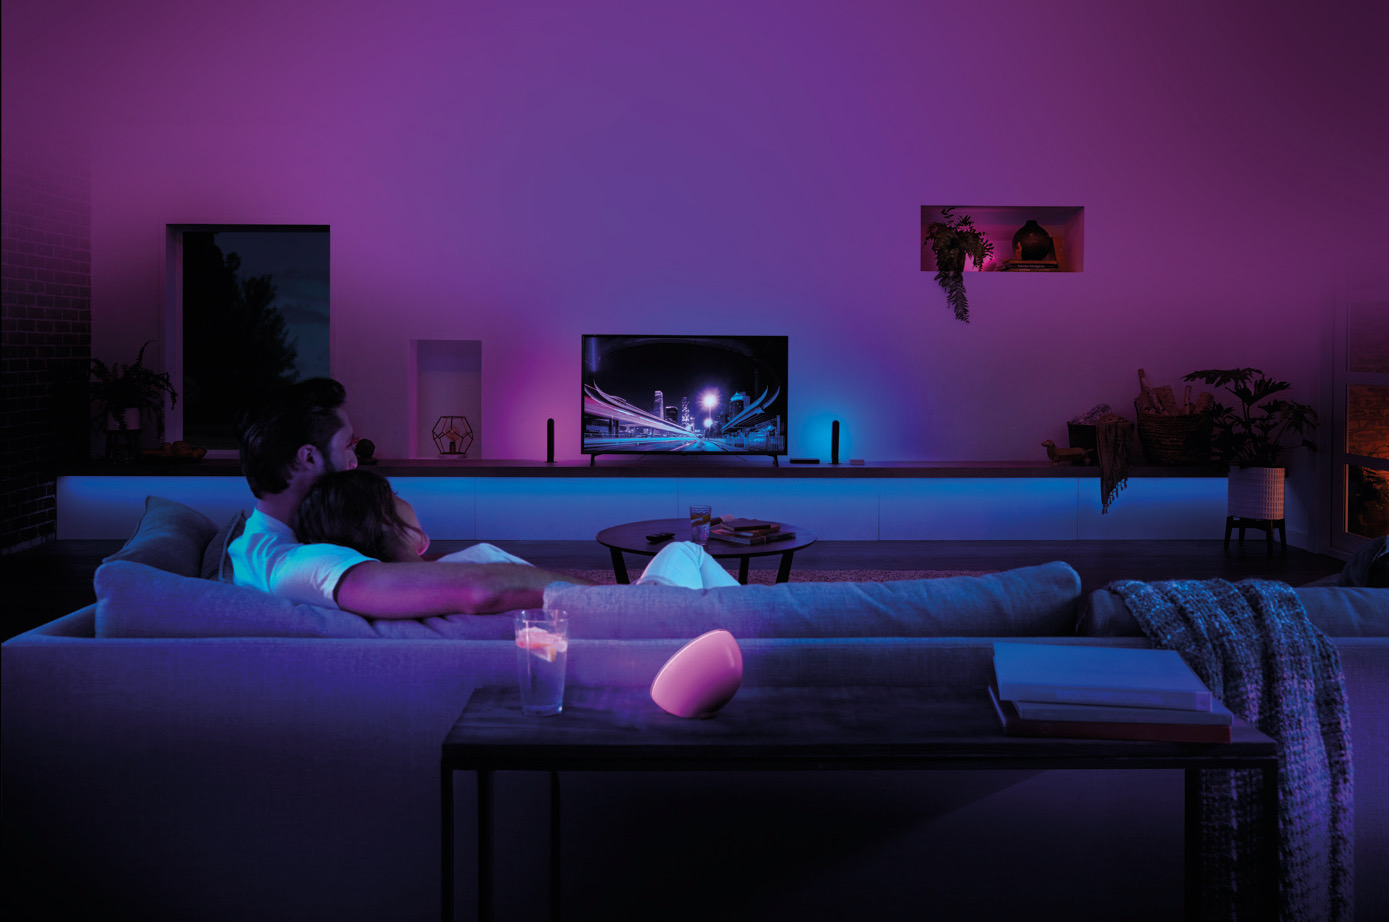 Hueblog: Philips Hue 4.0 improves placement of lamps in the entertainment area